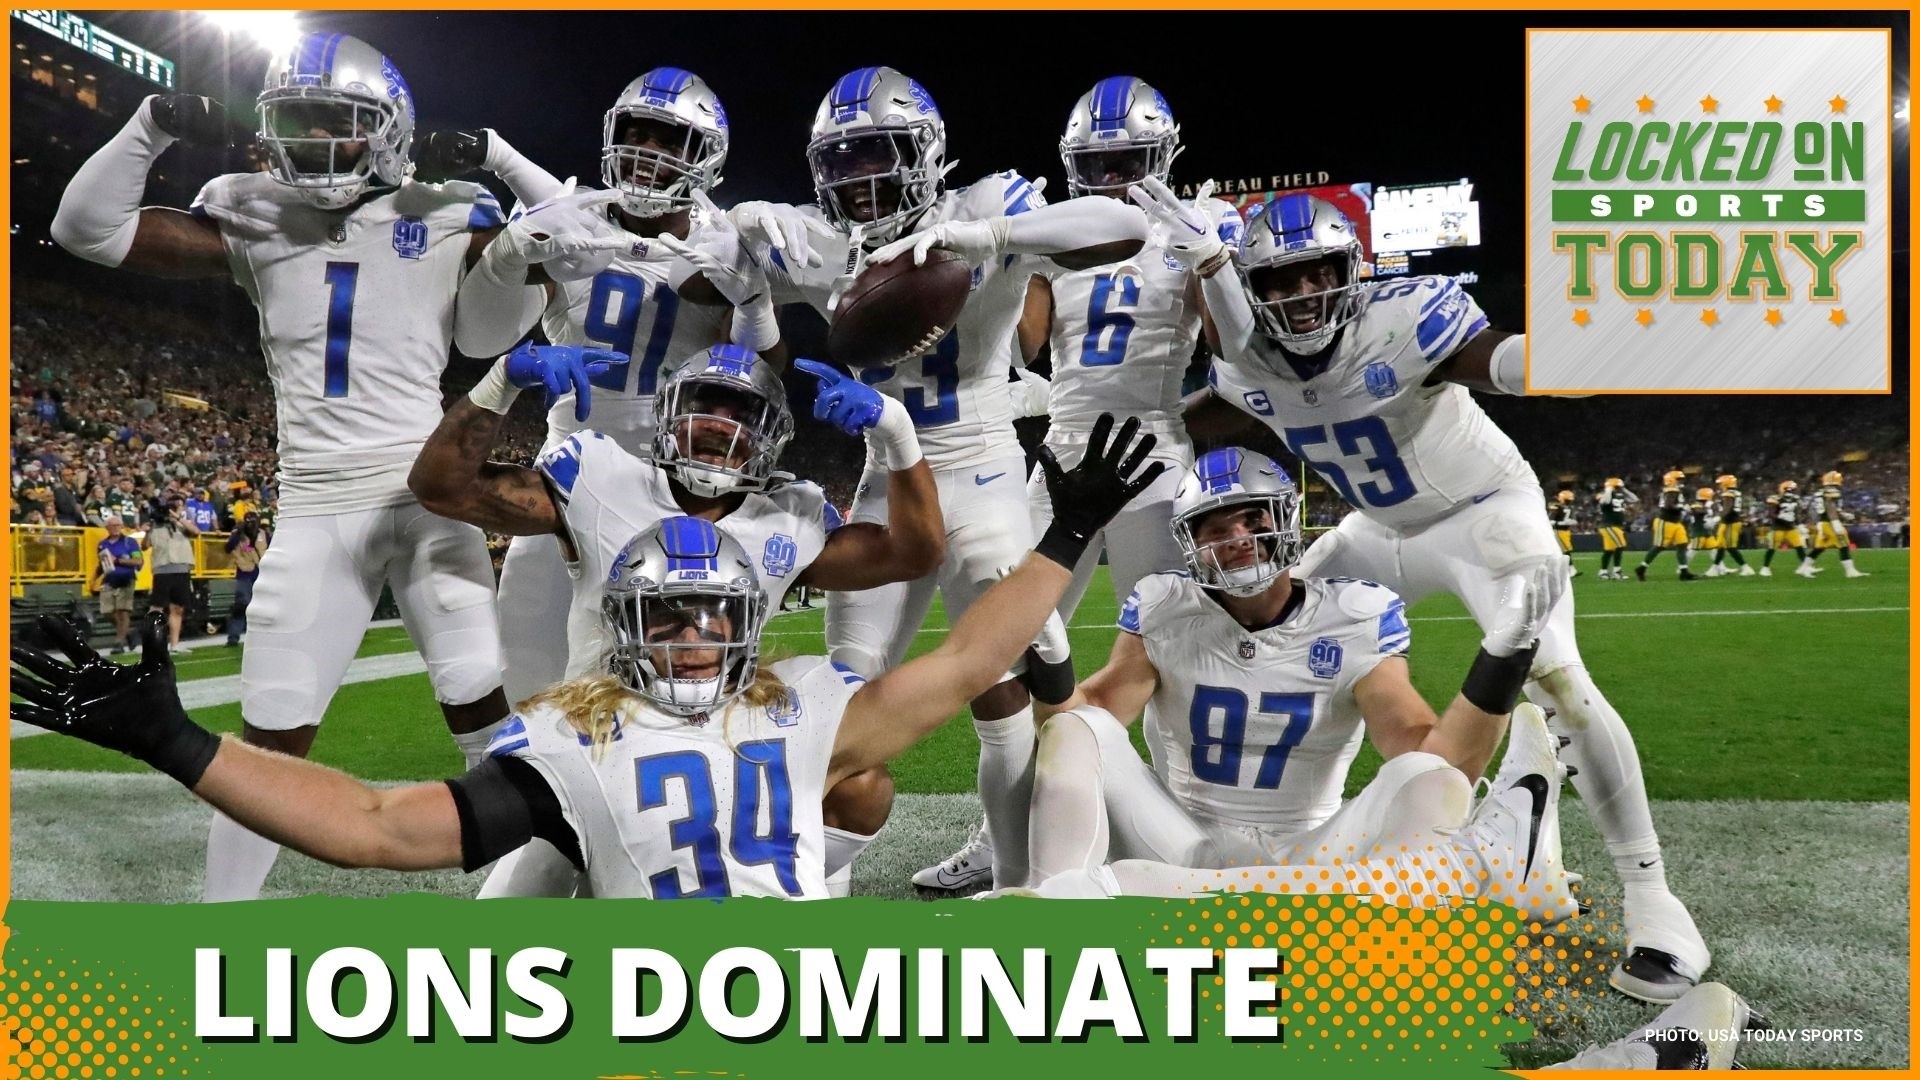 Detroit Lions dominate Green Bay Packers Thursday Night Football wcnc